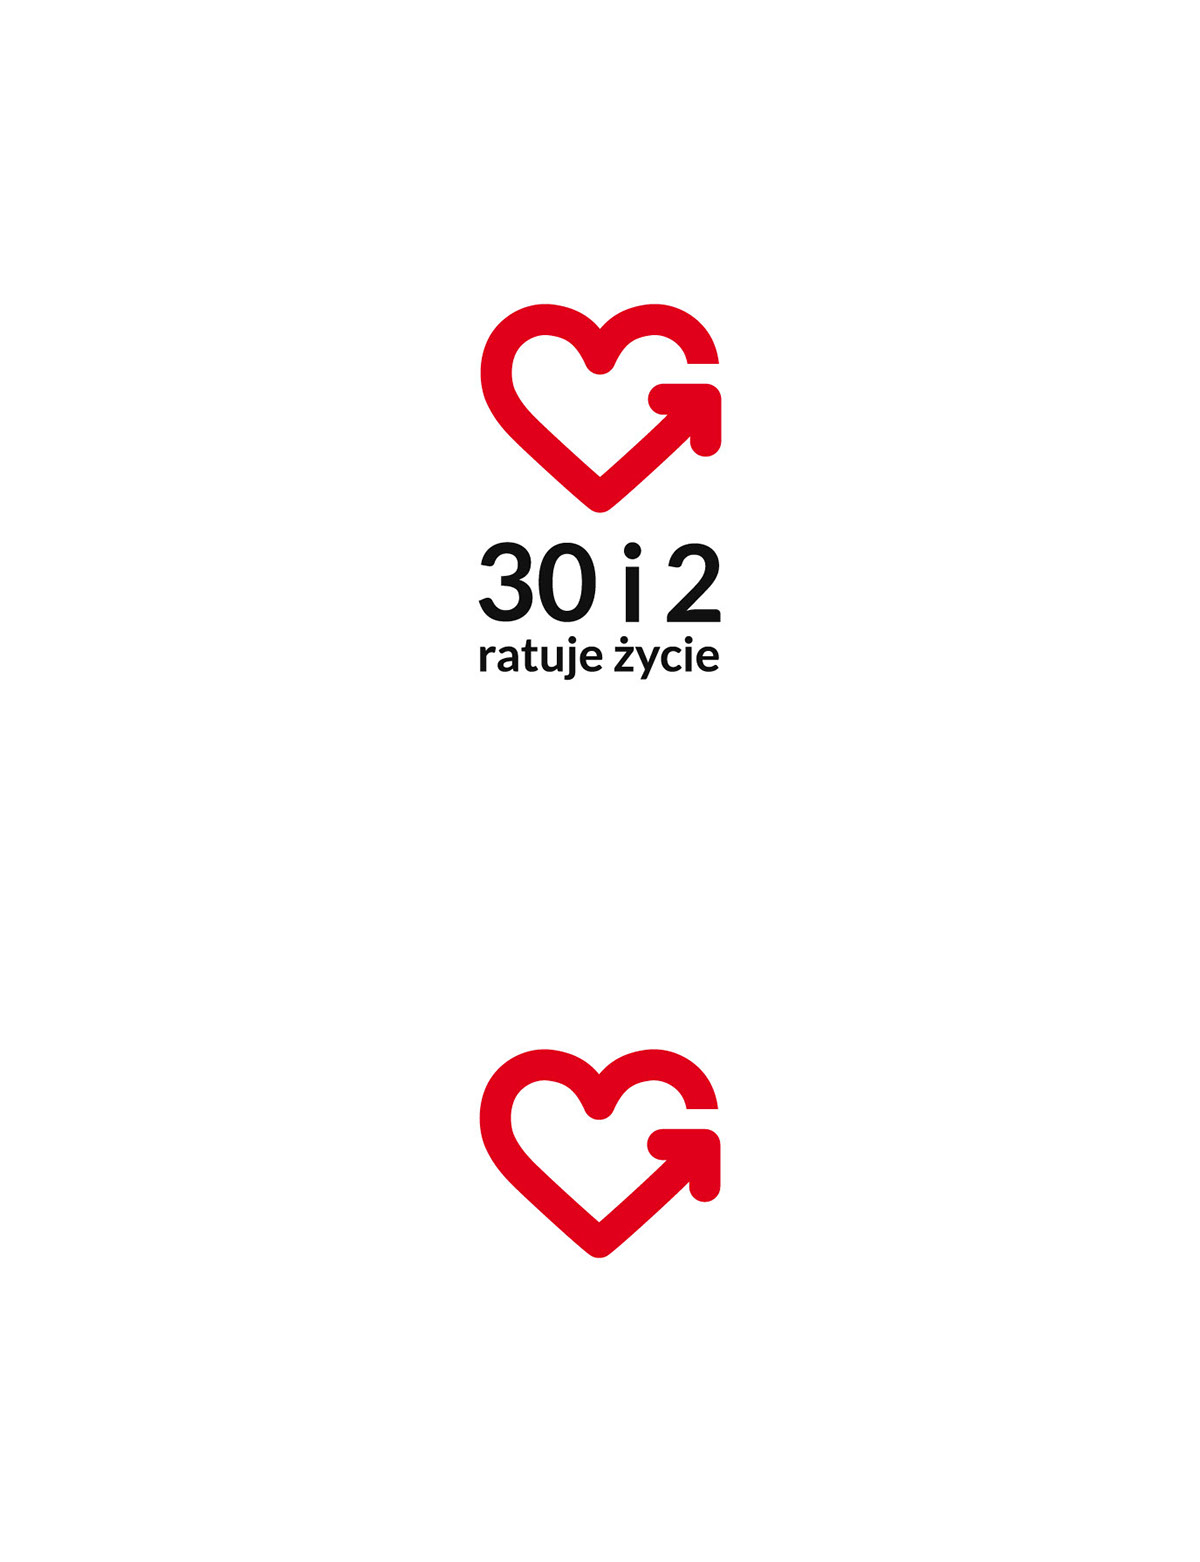 social campaign logo  posters first aid basic support life  pierwsza pomoc resuscytacja CPR Resuscitation